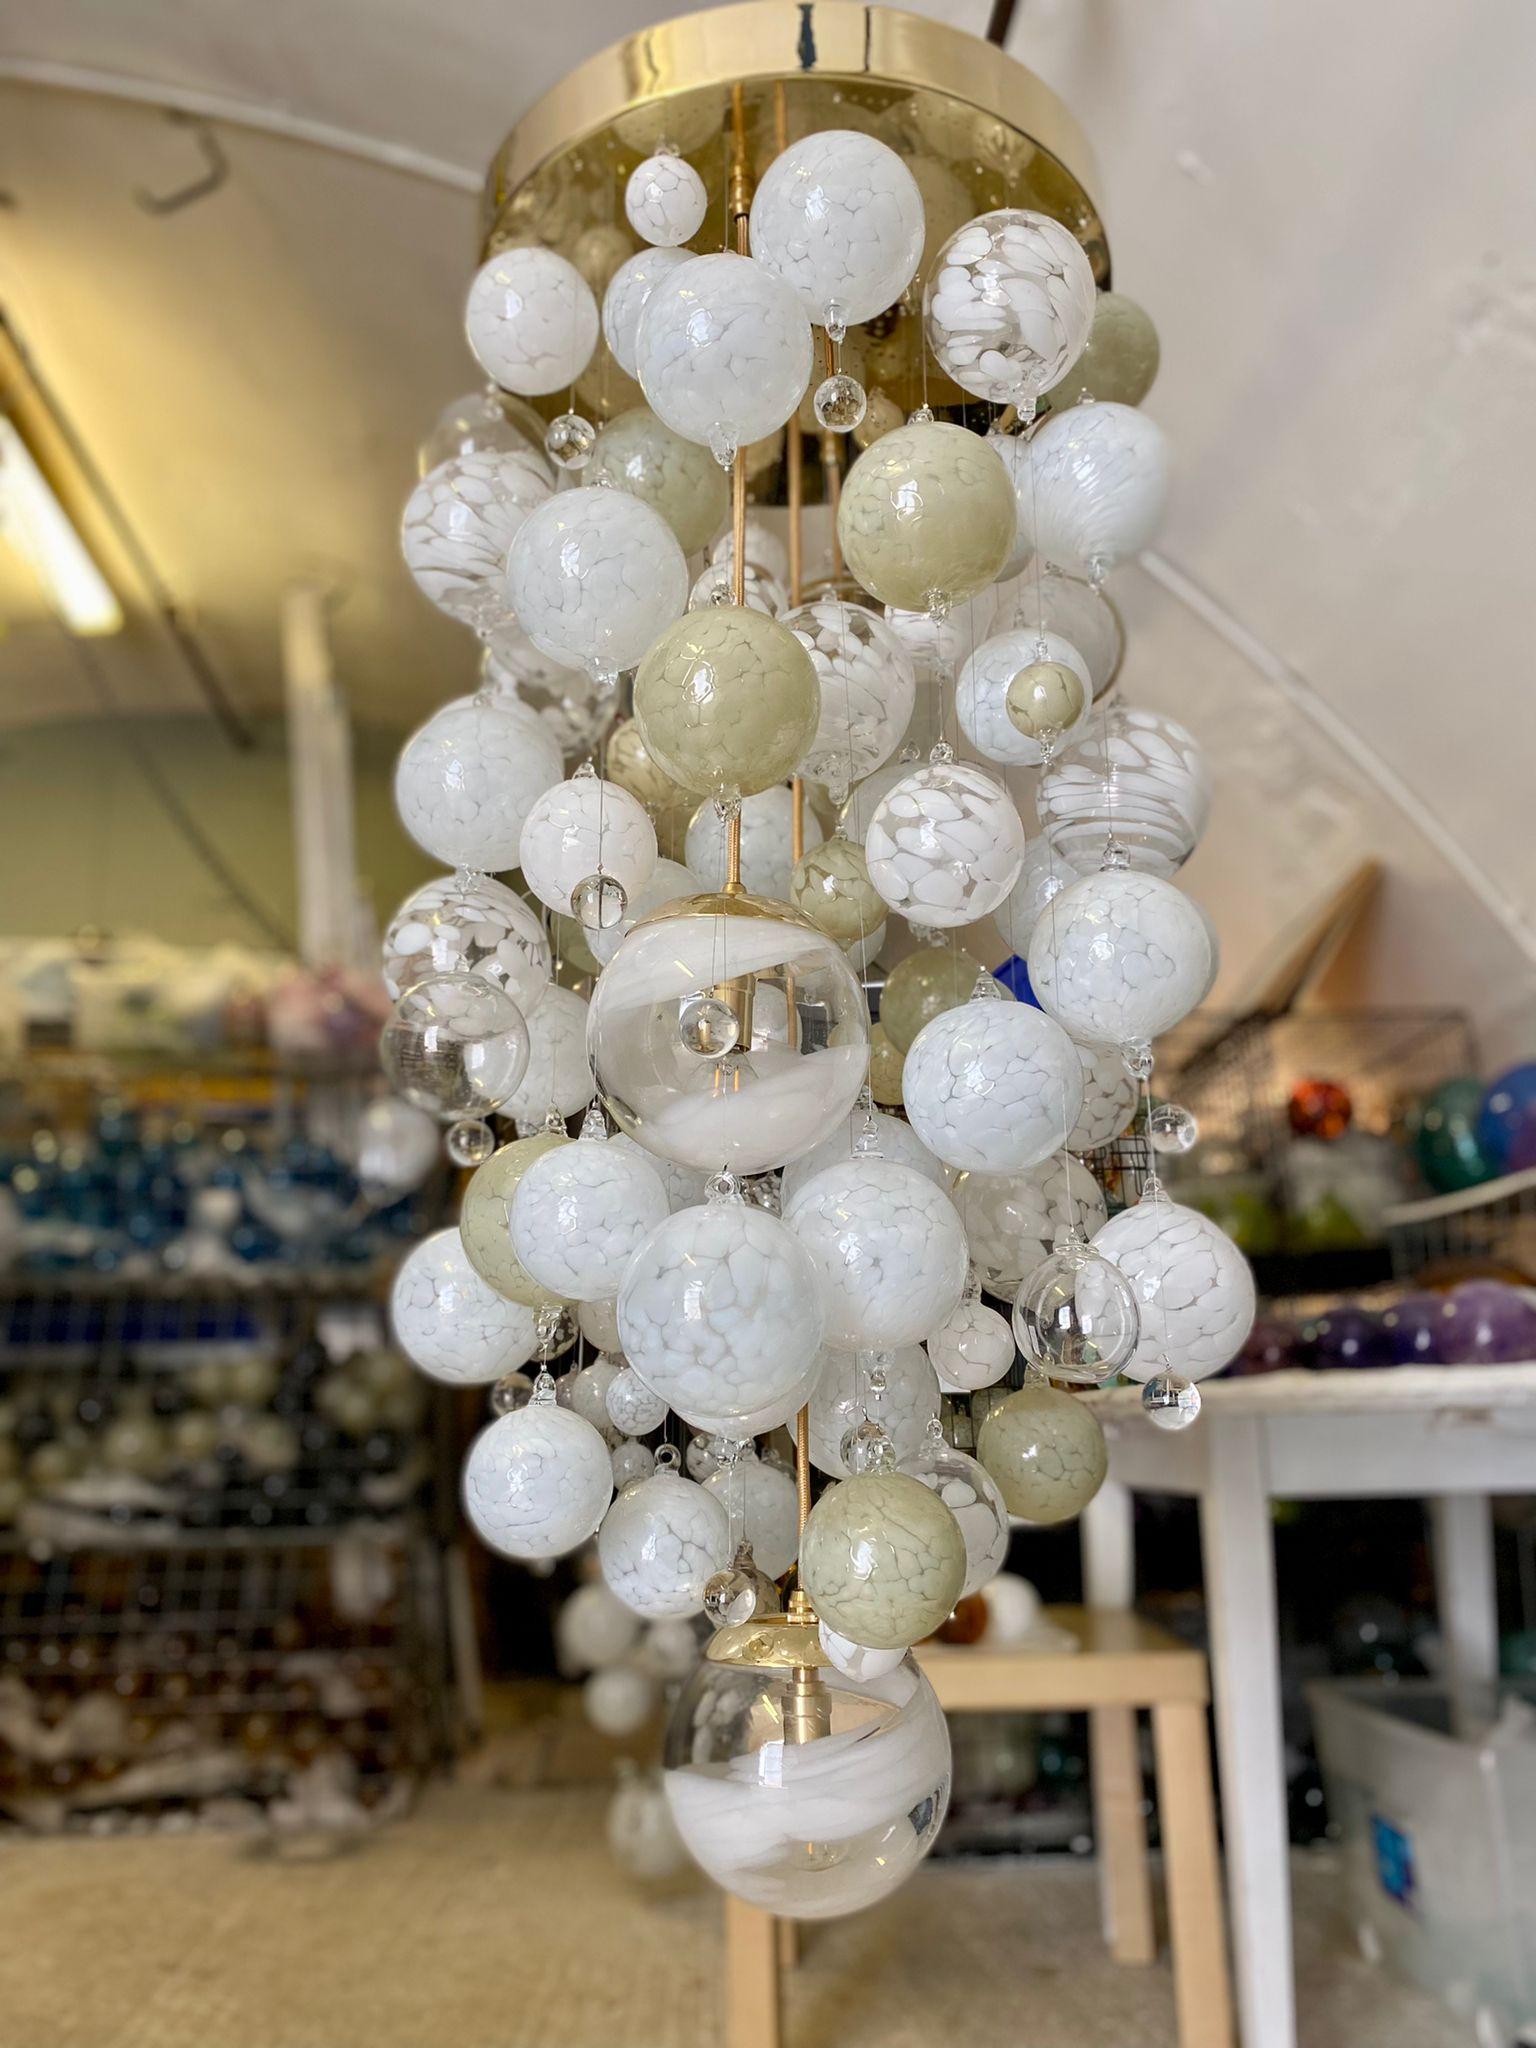 British Origin II Chandelier by Roast Featuring over 90 Blown Glass Spheres For Sale